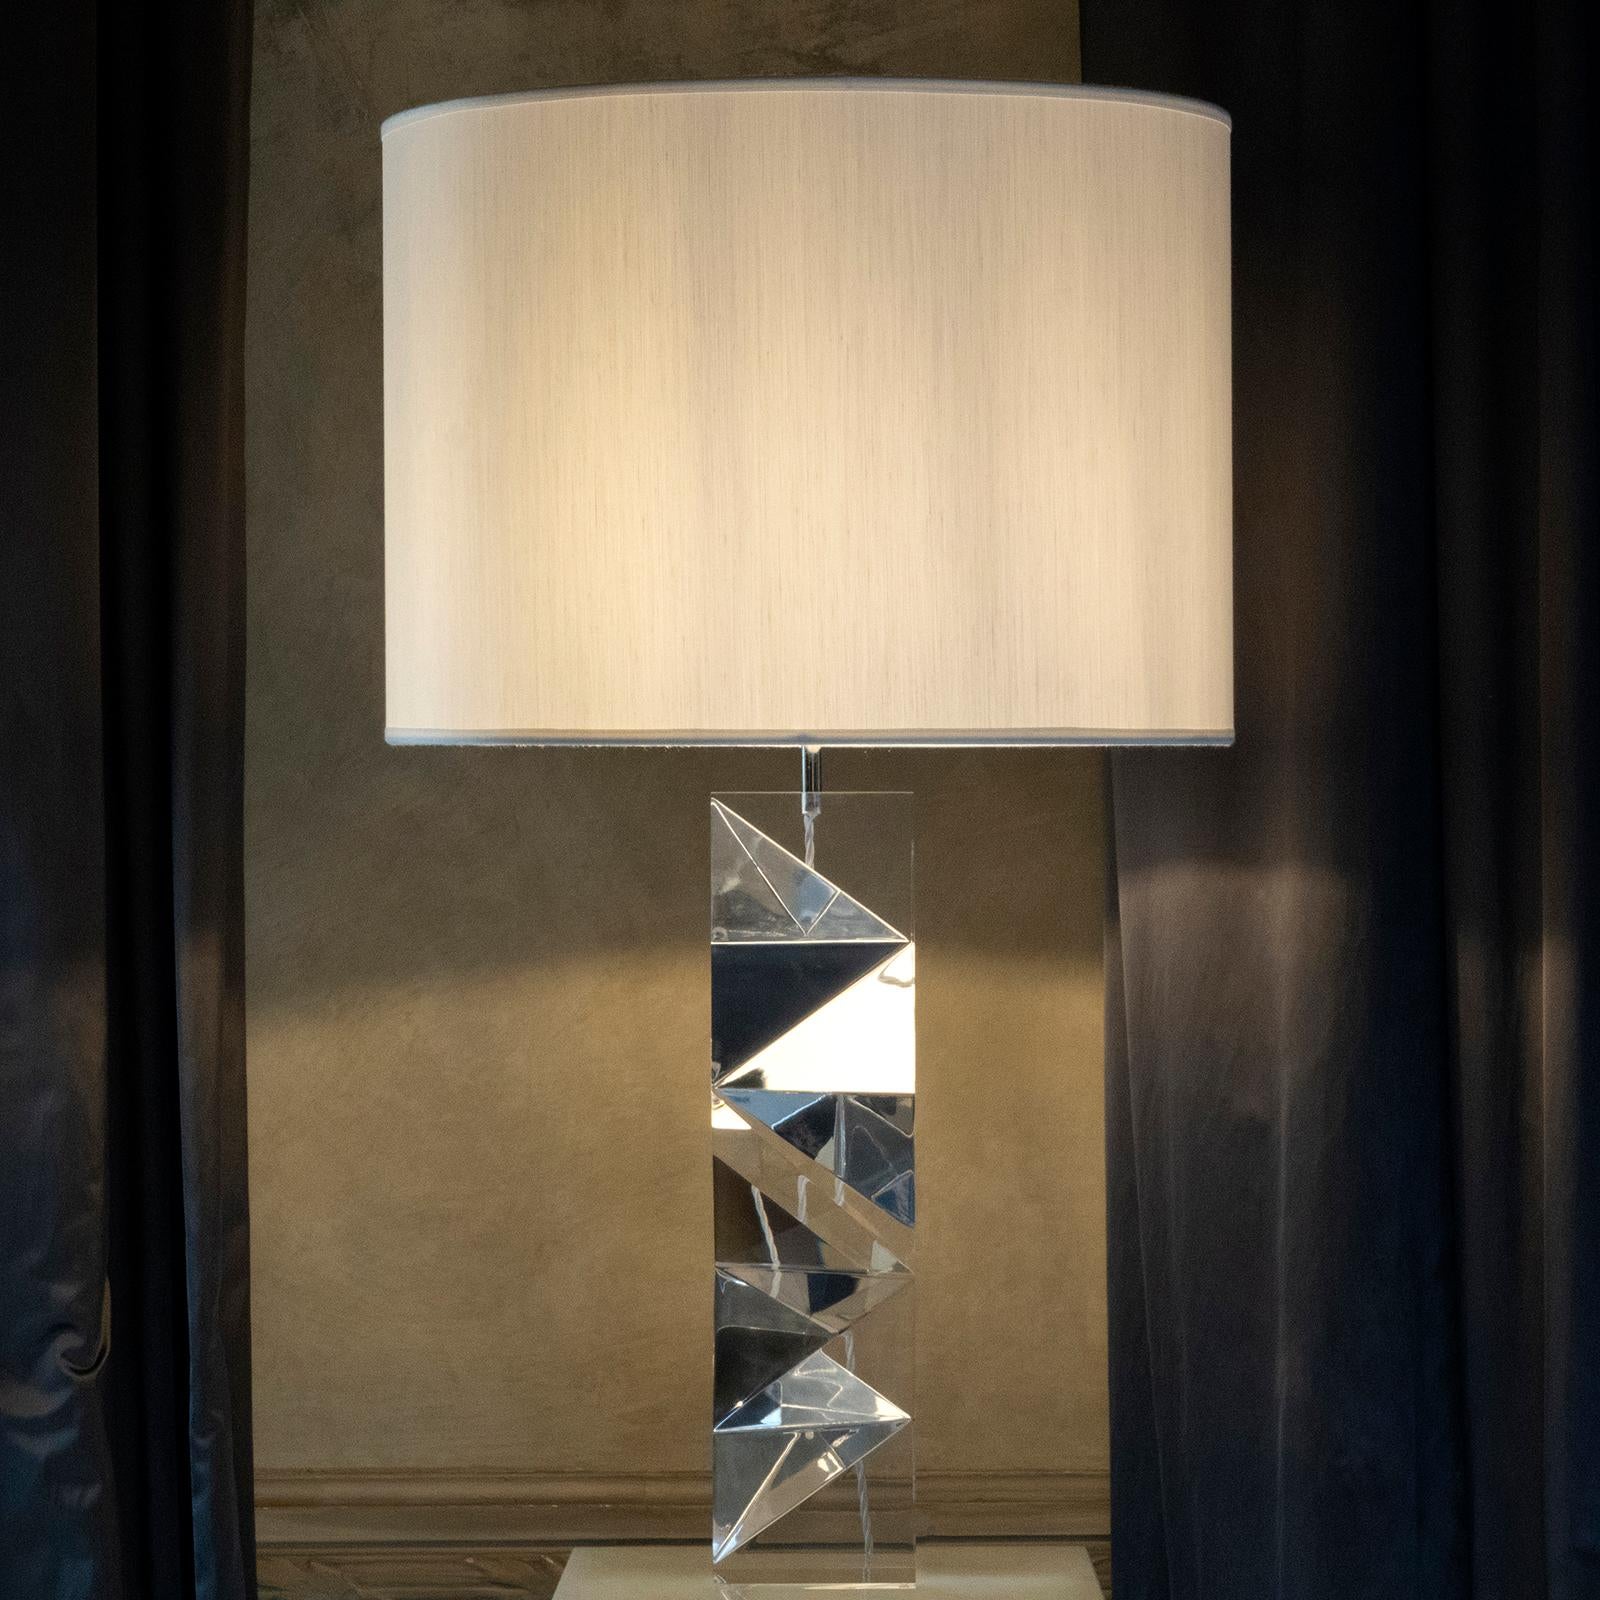 Sculptural faceted clear plexiglass table lamp part of the Flair edition collection, chrome details, white shantung lampshade, lamp measure: cm 13 x 13 x H 58, shade cm 50 x H 40, total high cm 94.